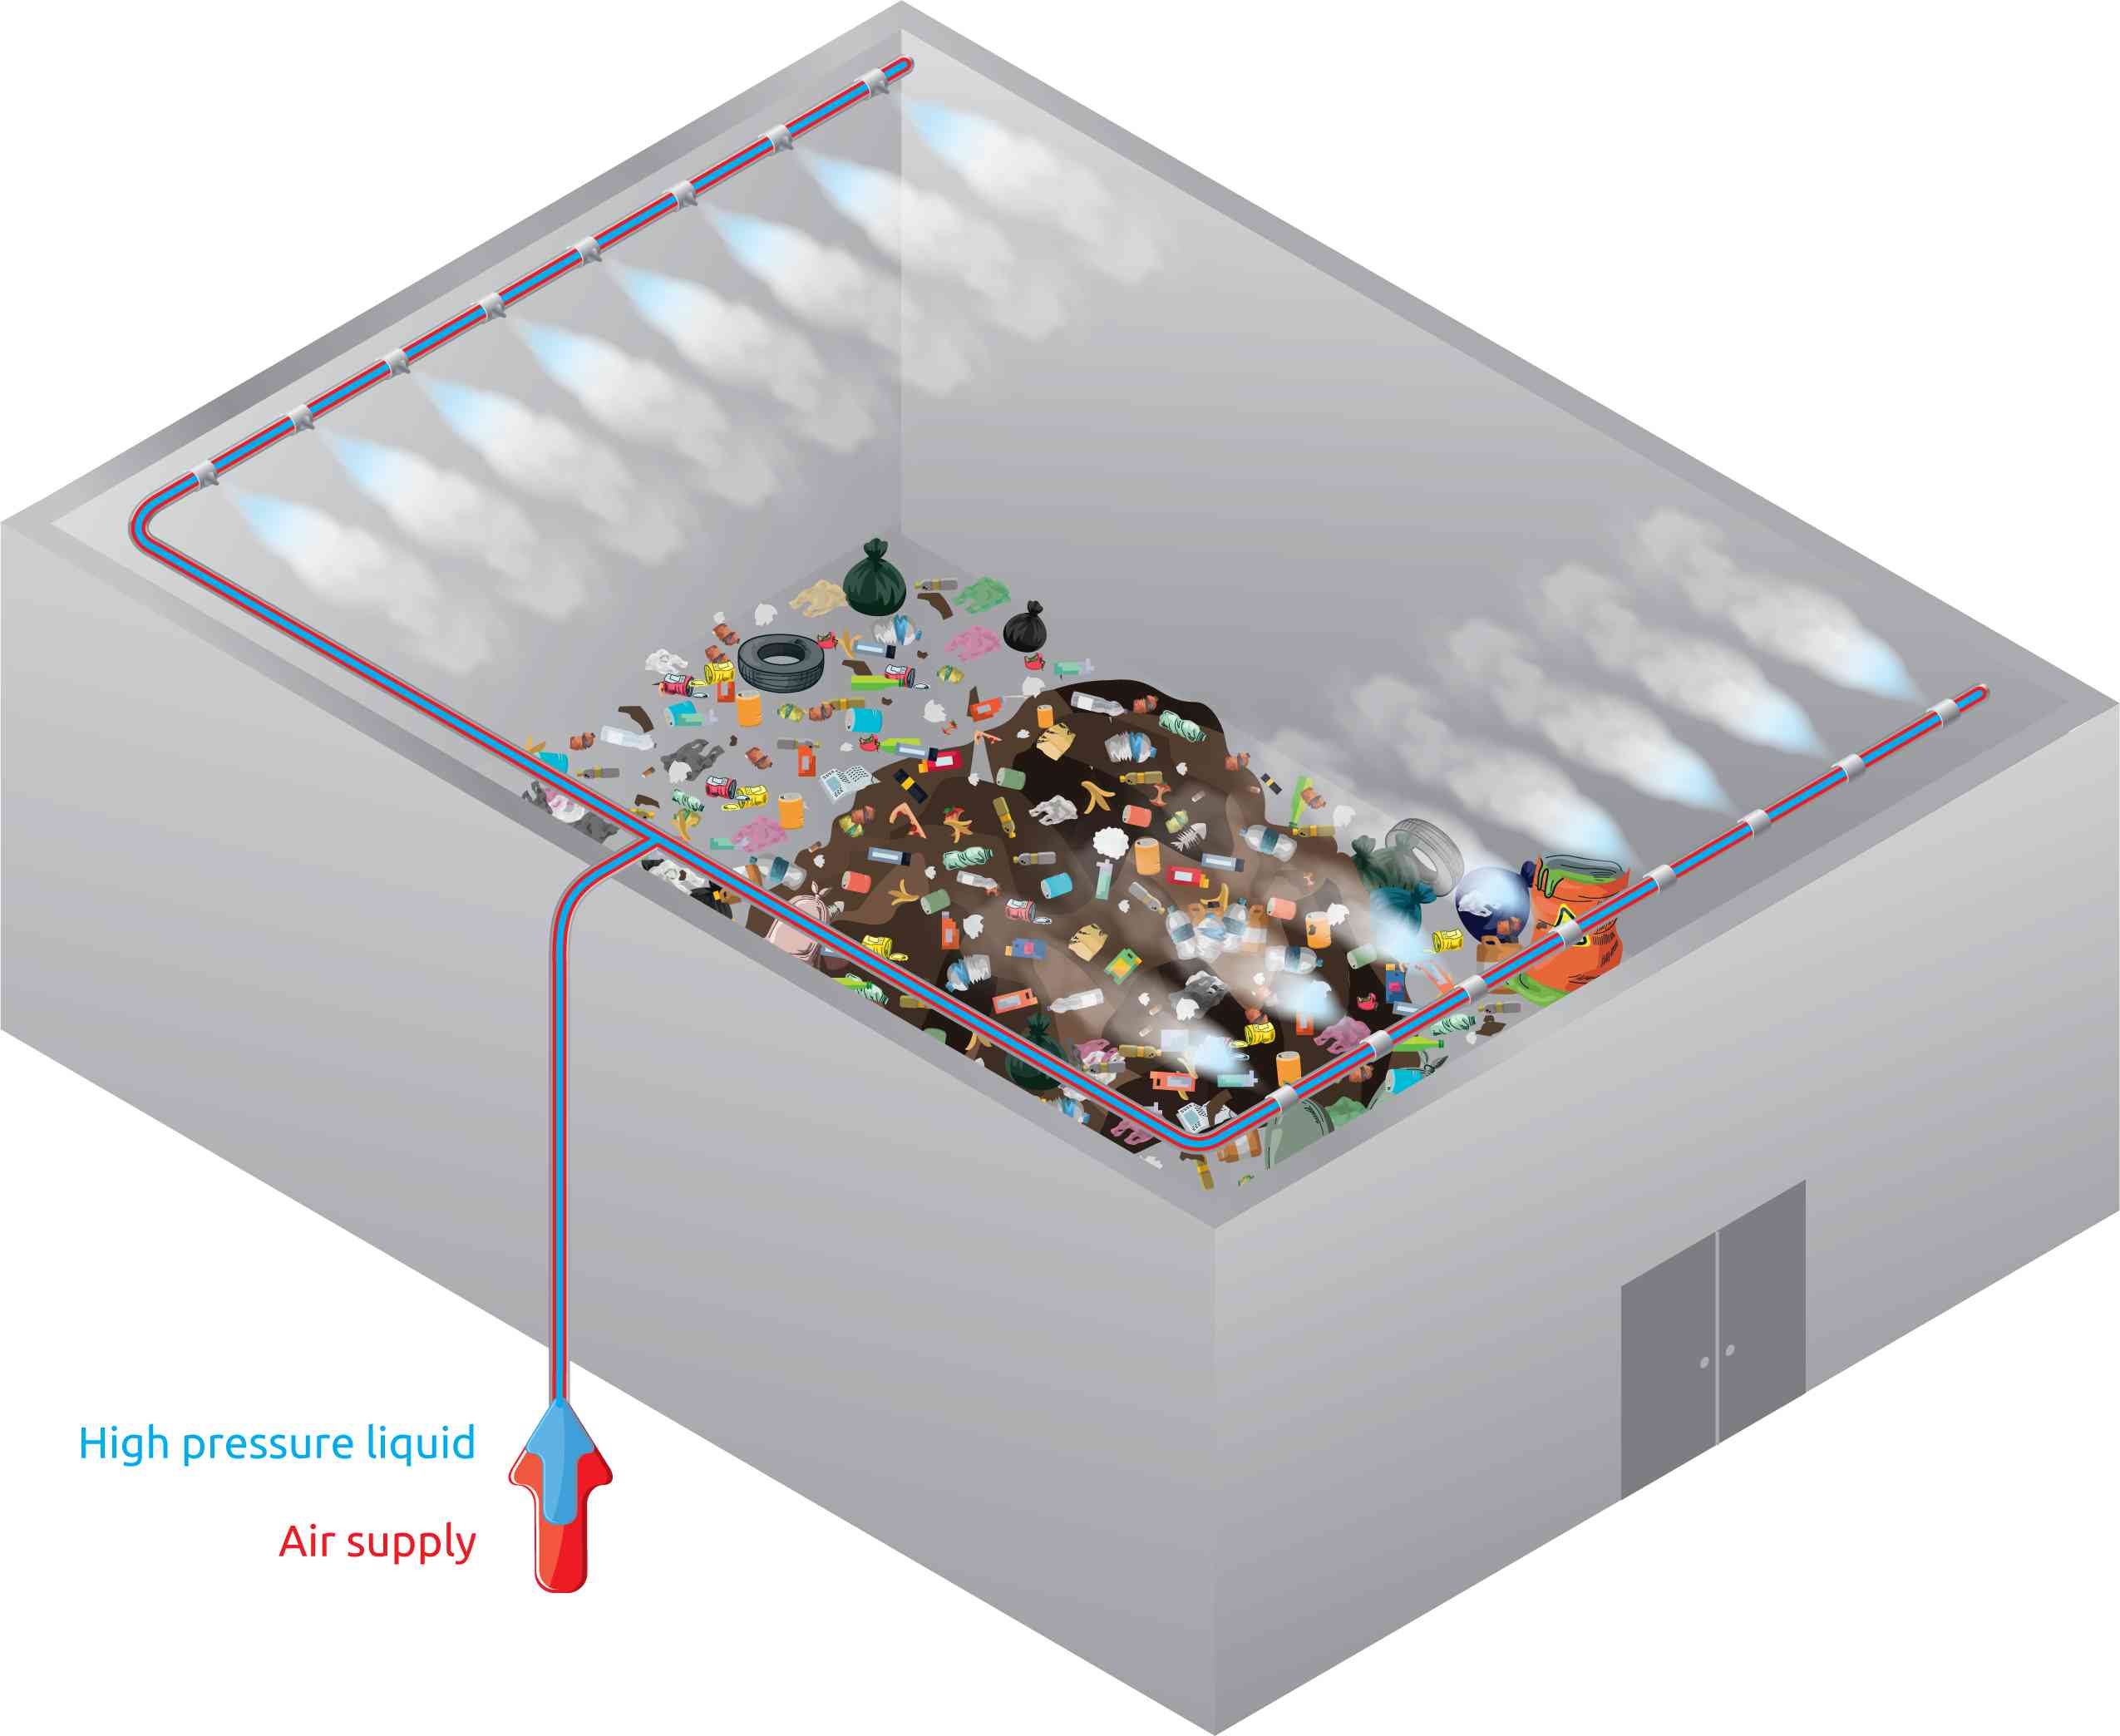 Illustration of an odor control system at a recycling plant.